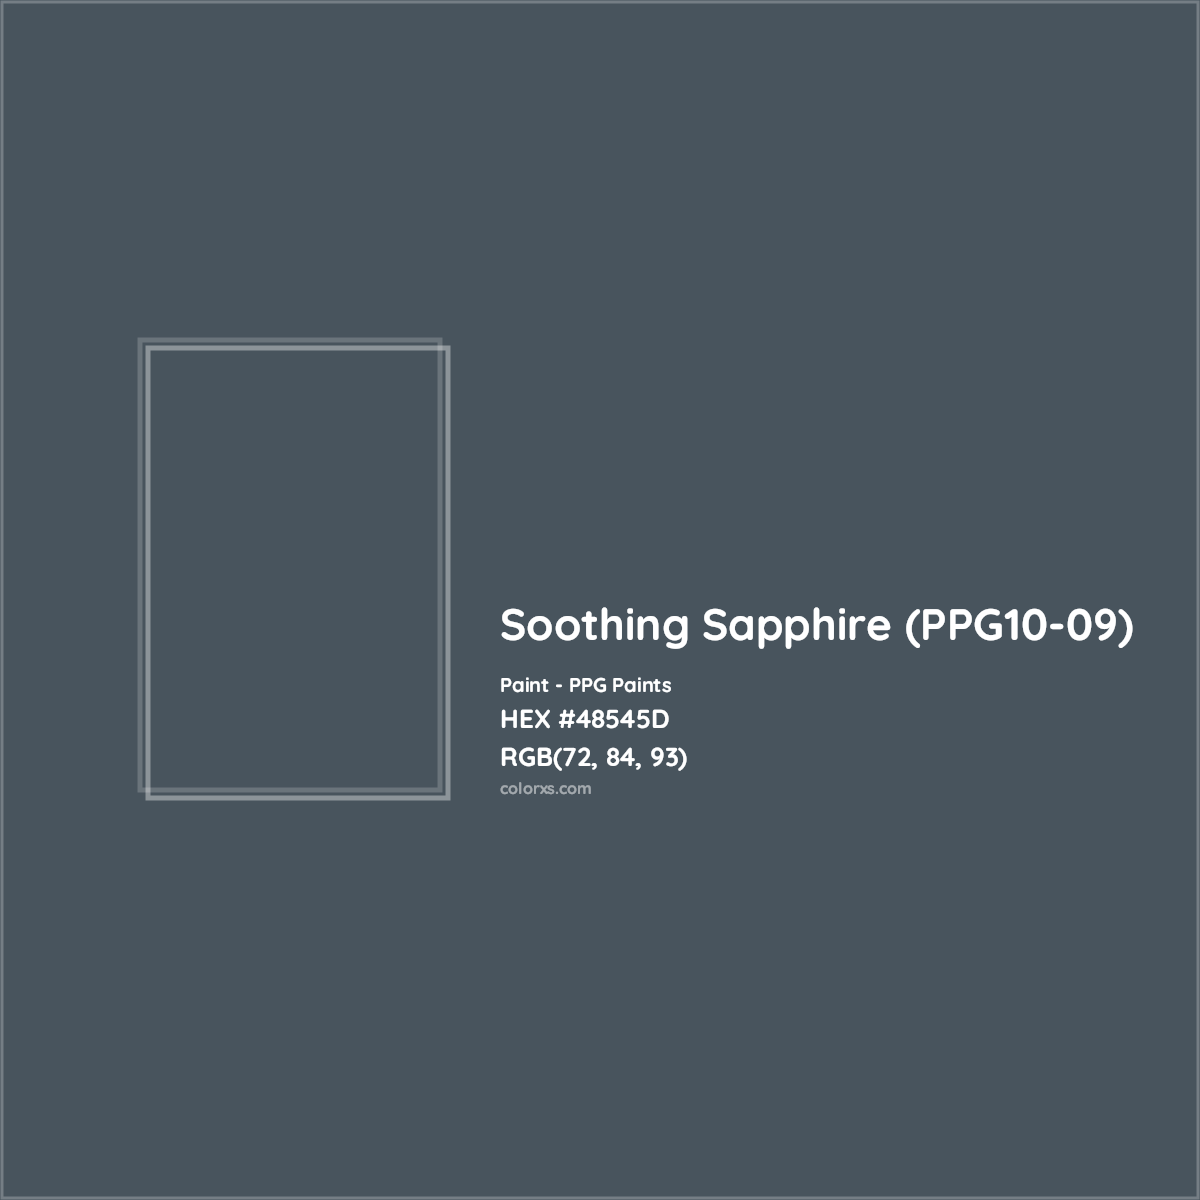 HEX #48545D Soothing Sapphire (PPG10-09) Paint PPG Paints - Color Code